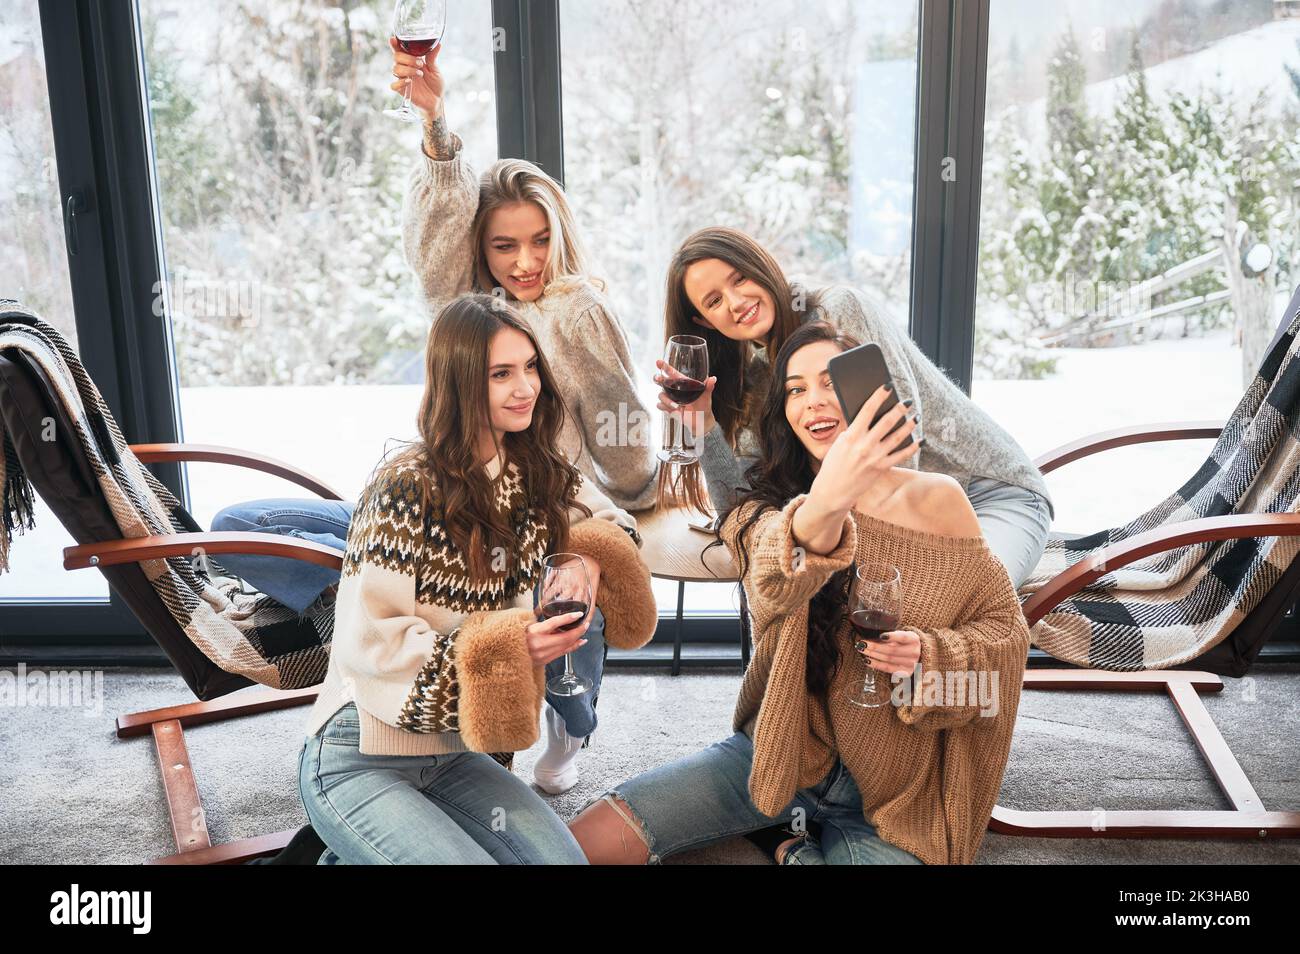 Young women enjoying winter weekends inside contemporary barn house. Four girls having fun, taking selfies on phone and drinking wine. Stock Photo